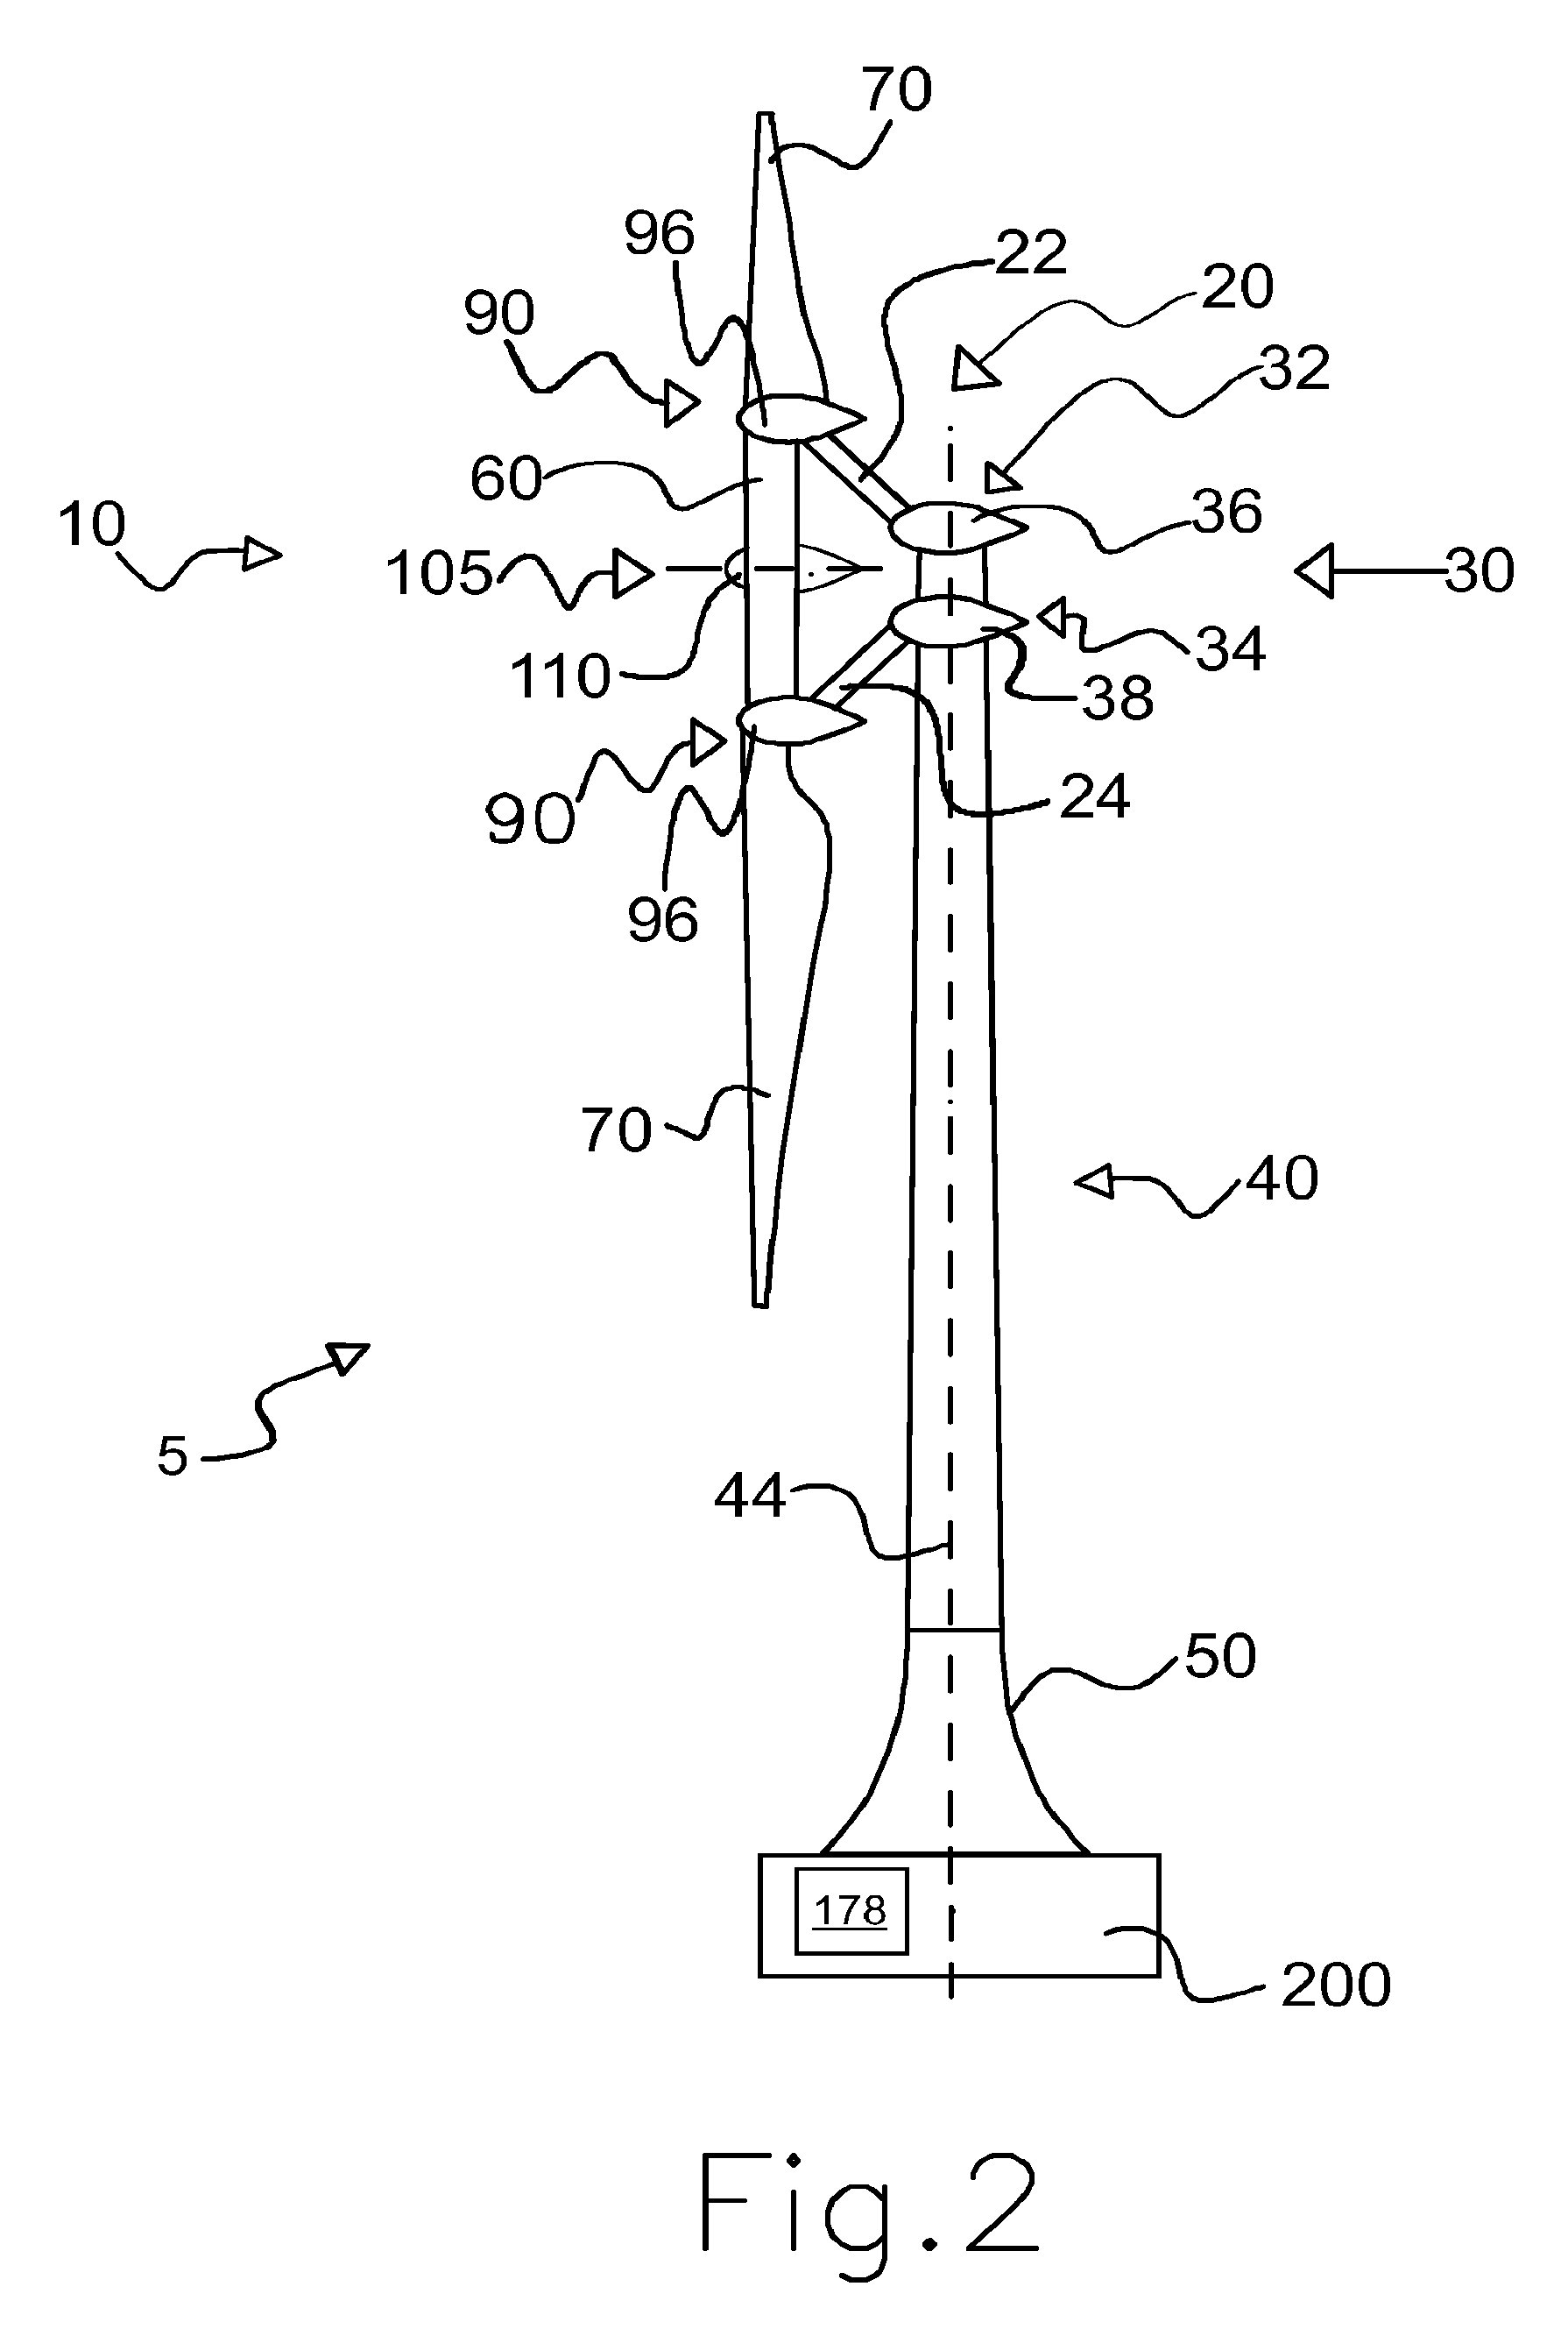 Wind turbine with integrated design and controlling method